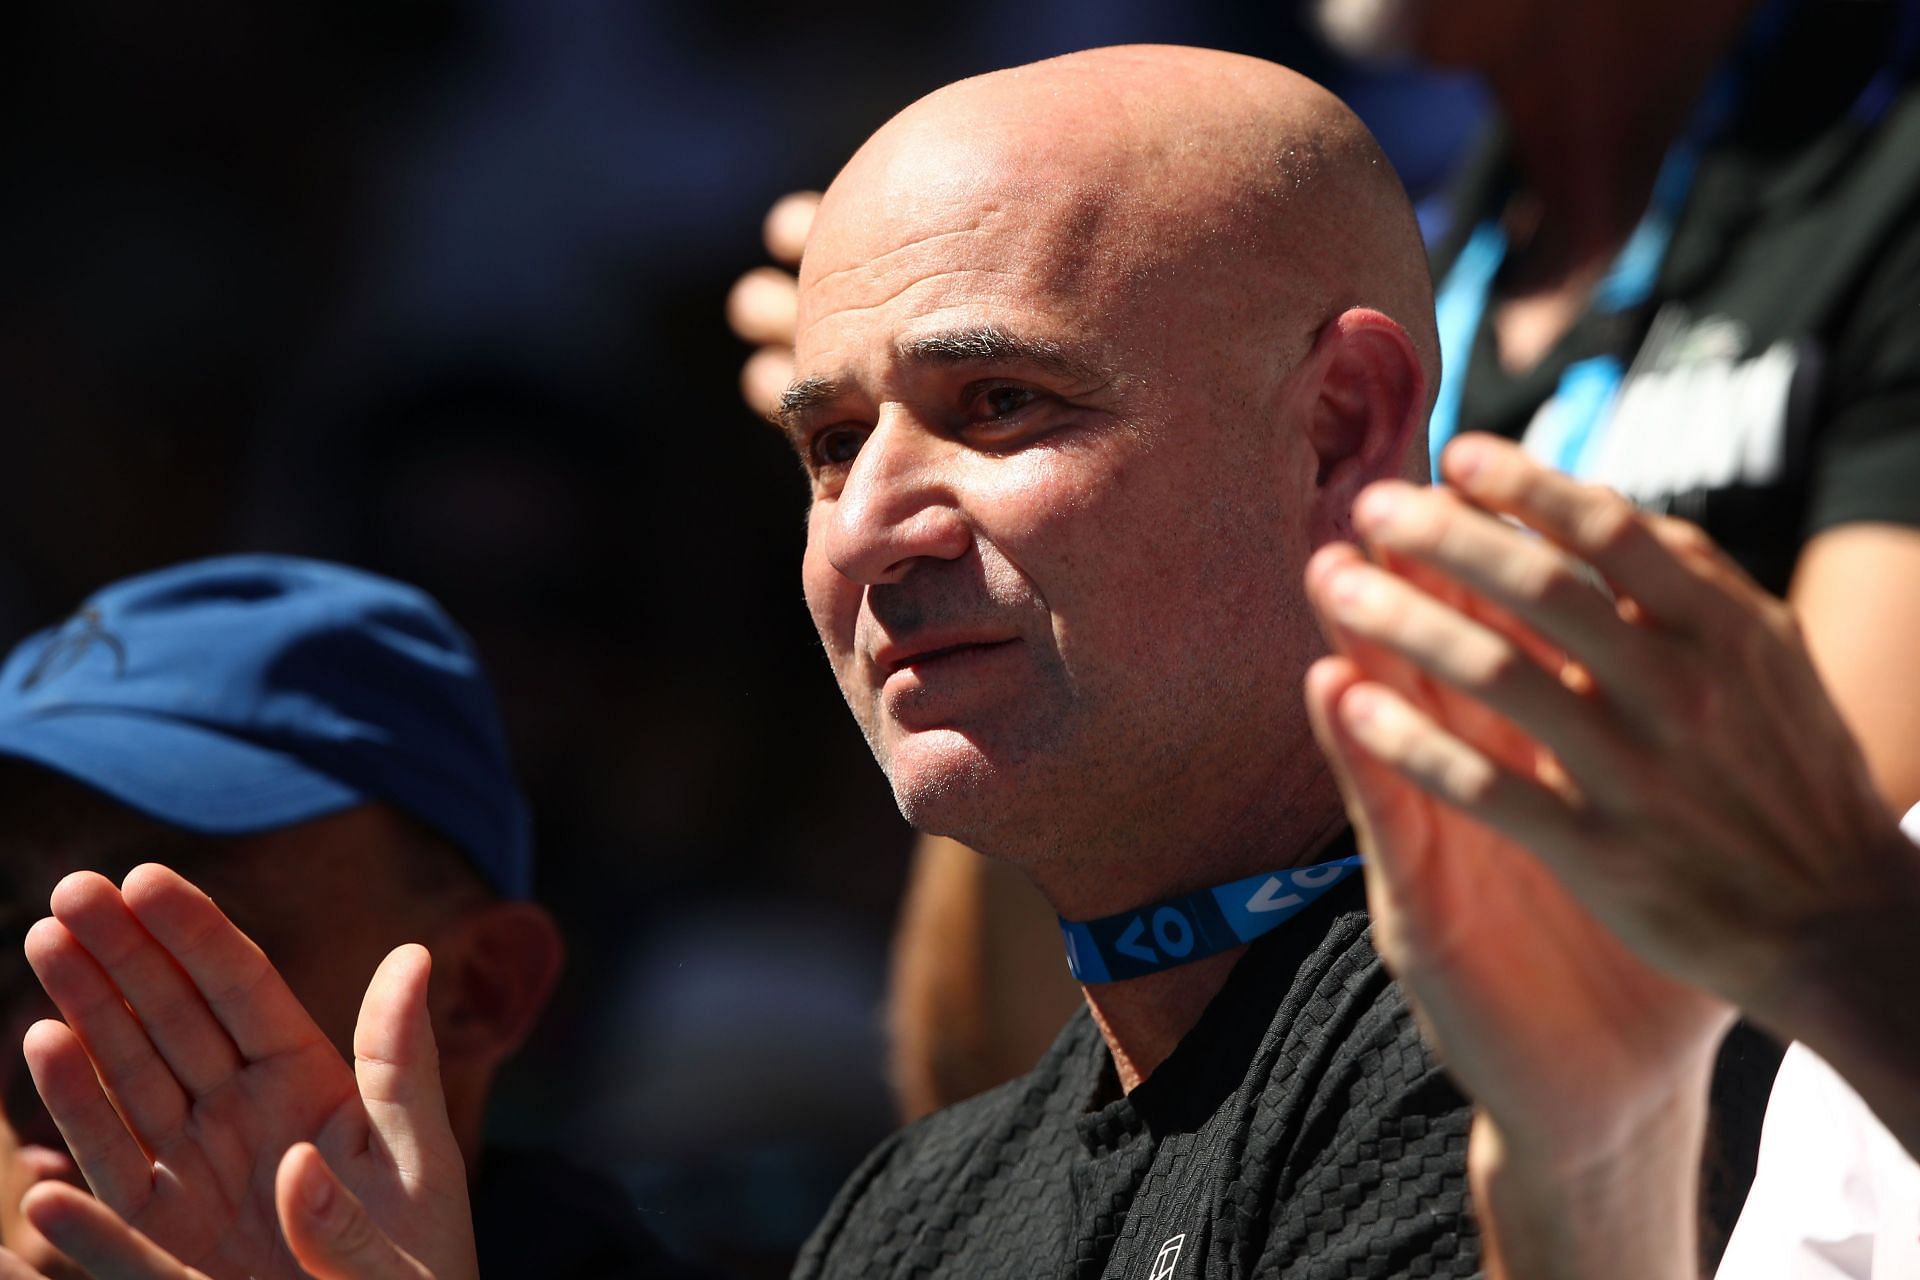 Andre Agassi at the 2018 Australian Open.